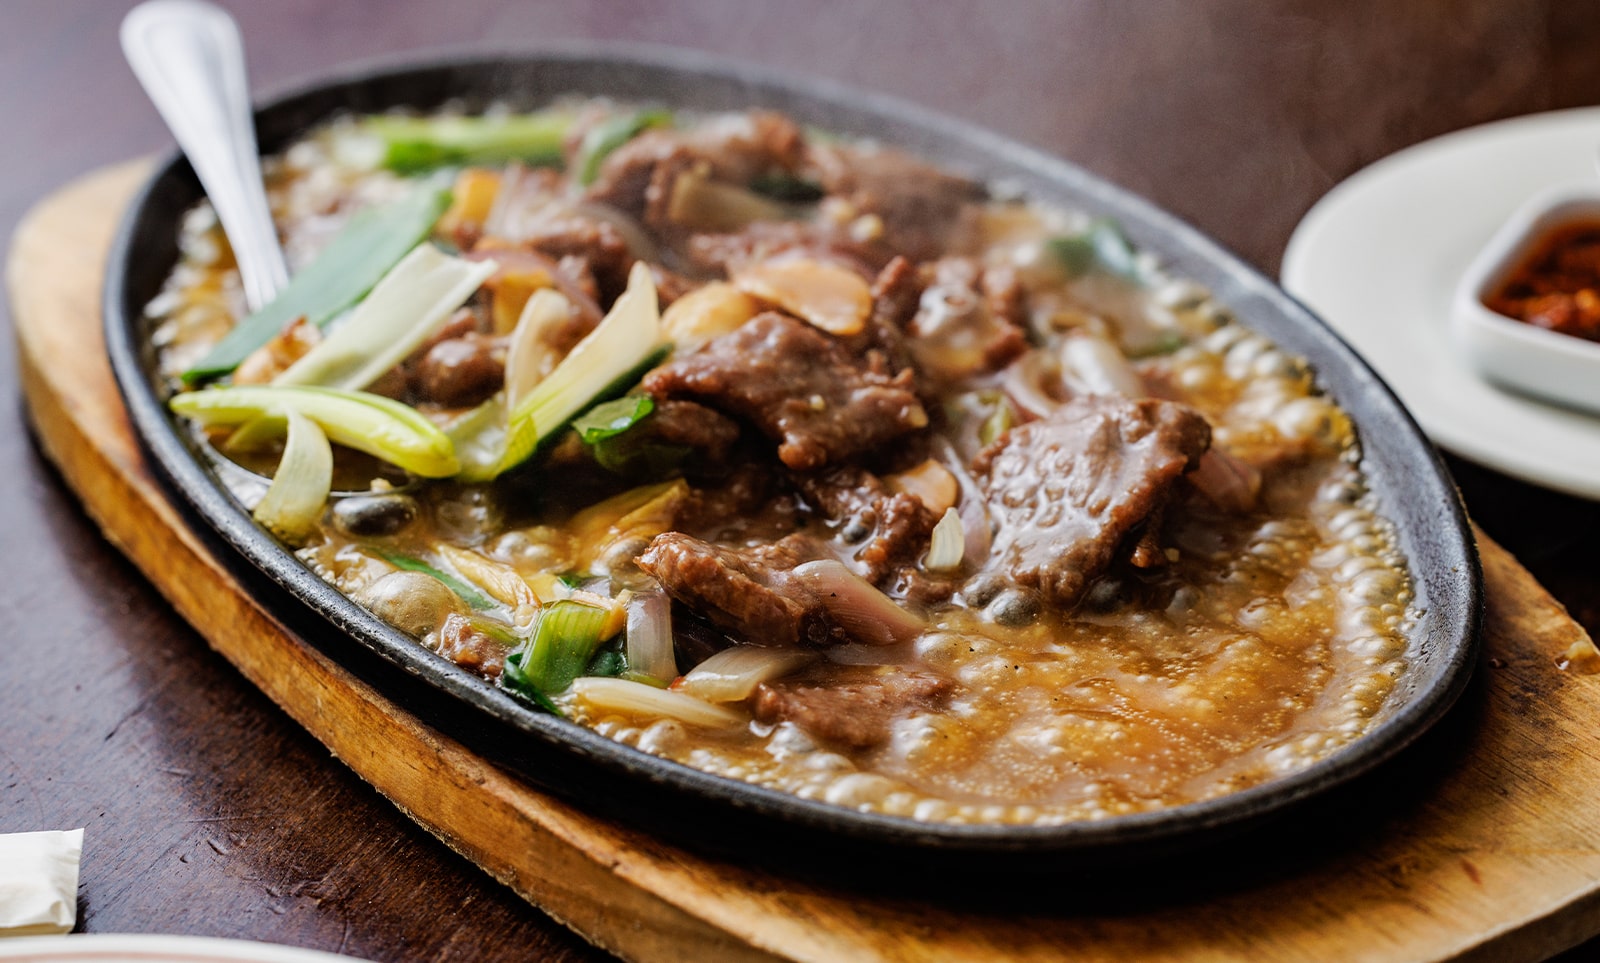 Lamb with Ginger and Spring Onion 薑蔥羊片